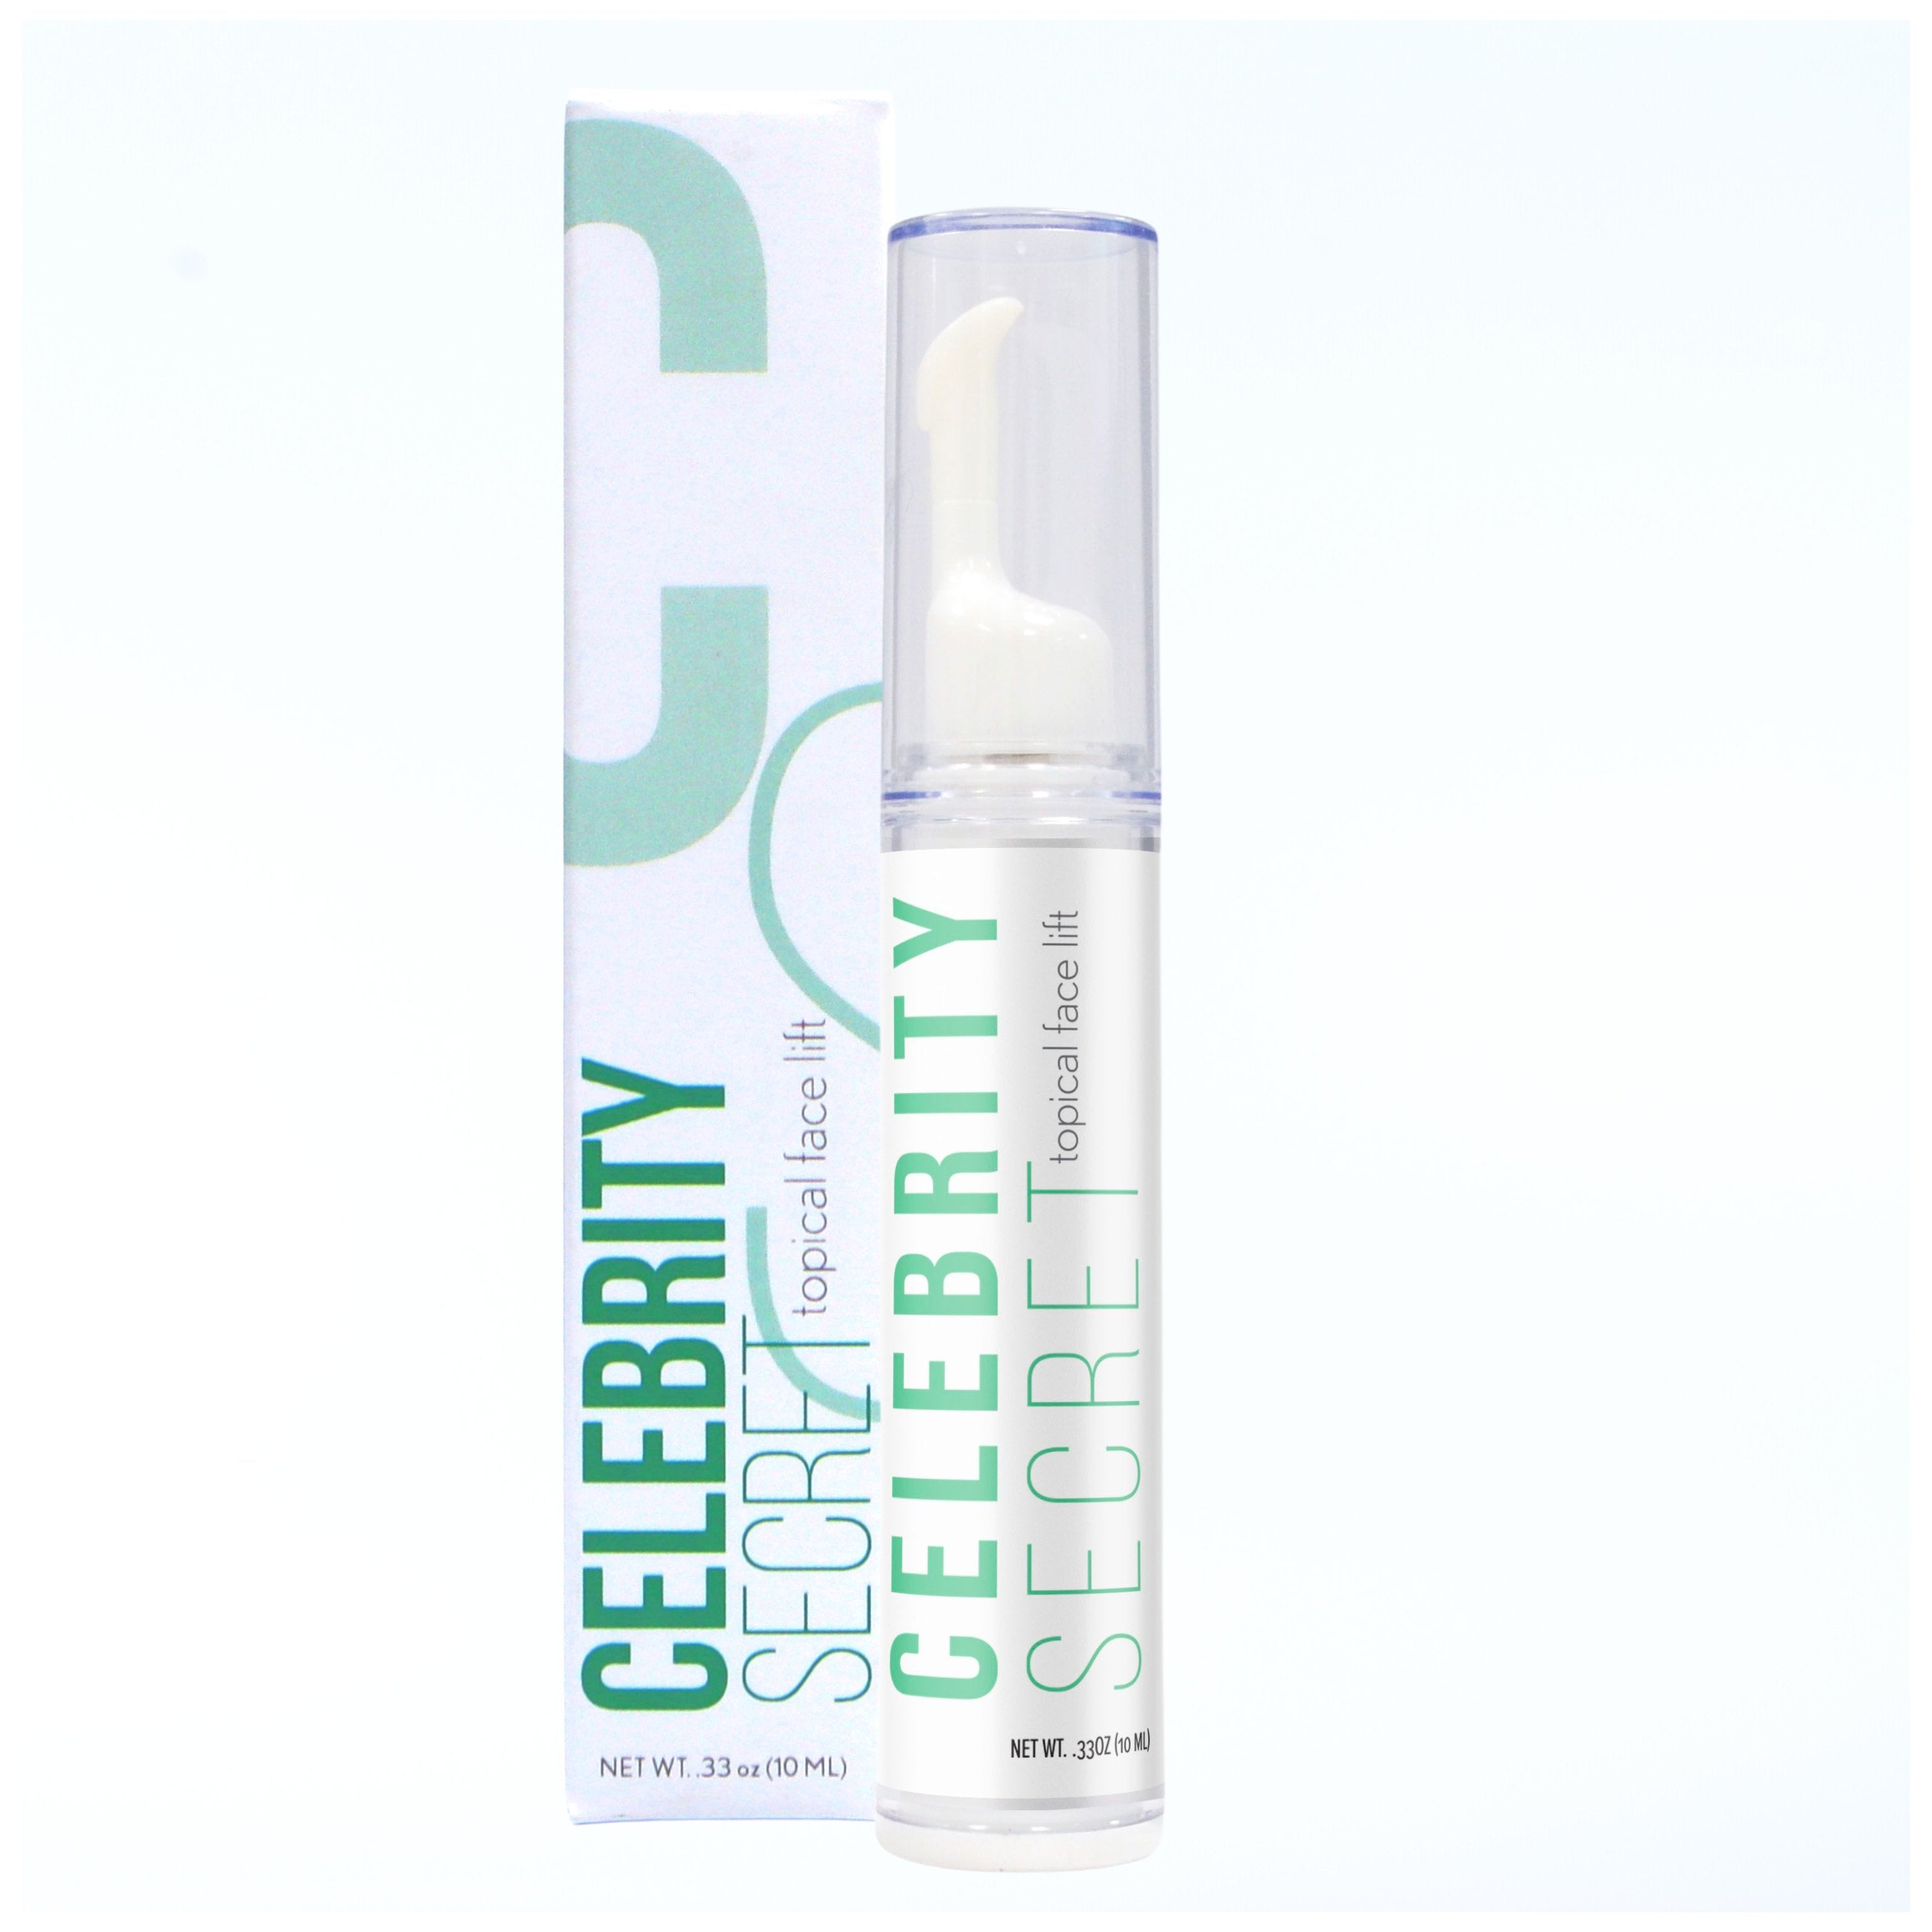 Worldwide Nutrition Celebrity Secret Instant Face Lift - Temporary Wrinkle Remover, Skin Tightener, Wrinkle Filler, Line Eraser - Hydrating Anti Aging Face Cream for Younger, Glowing Complexion -10 ml